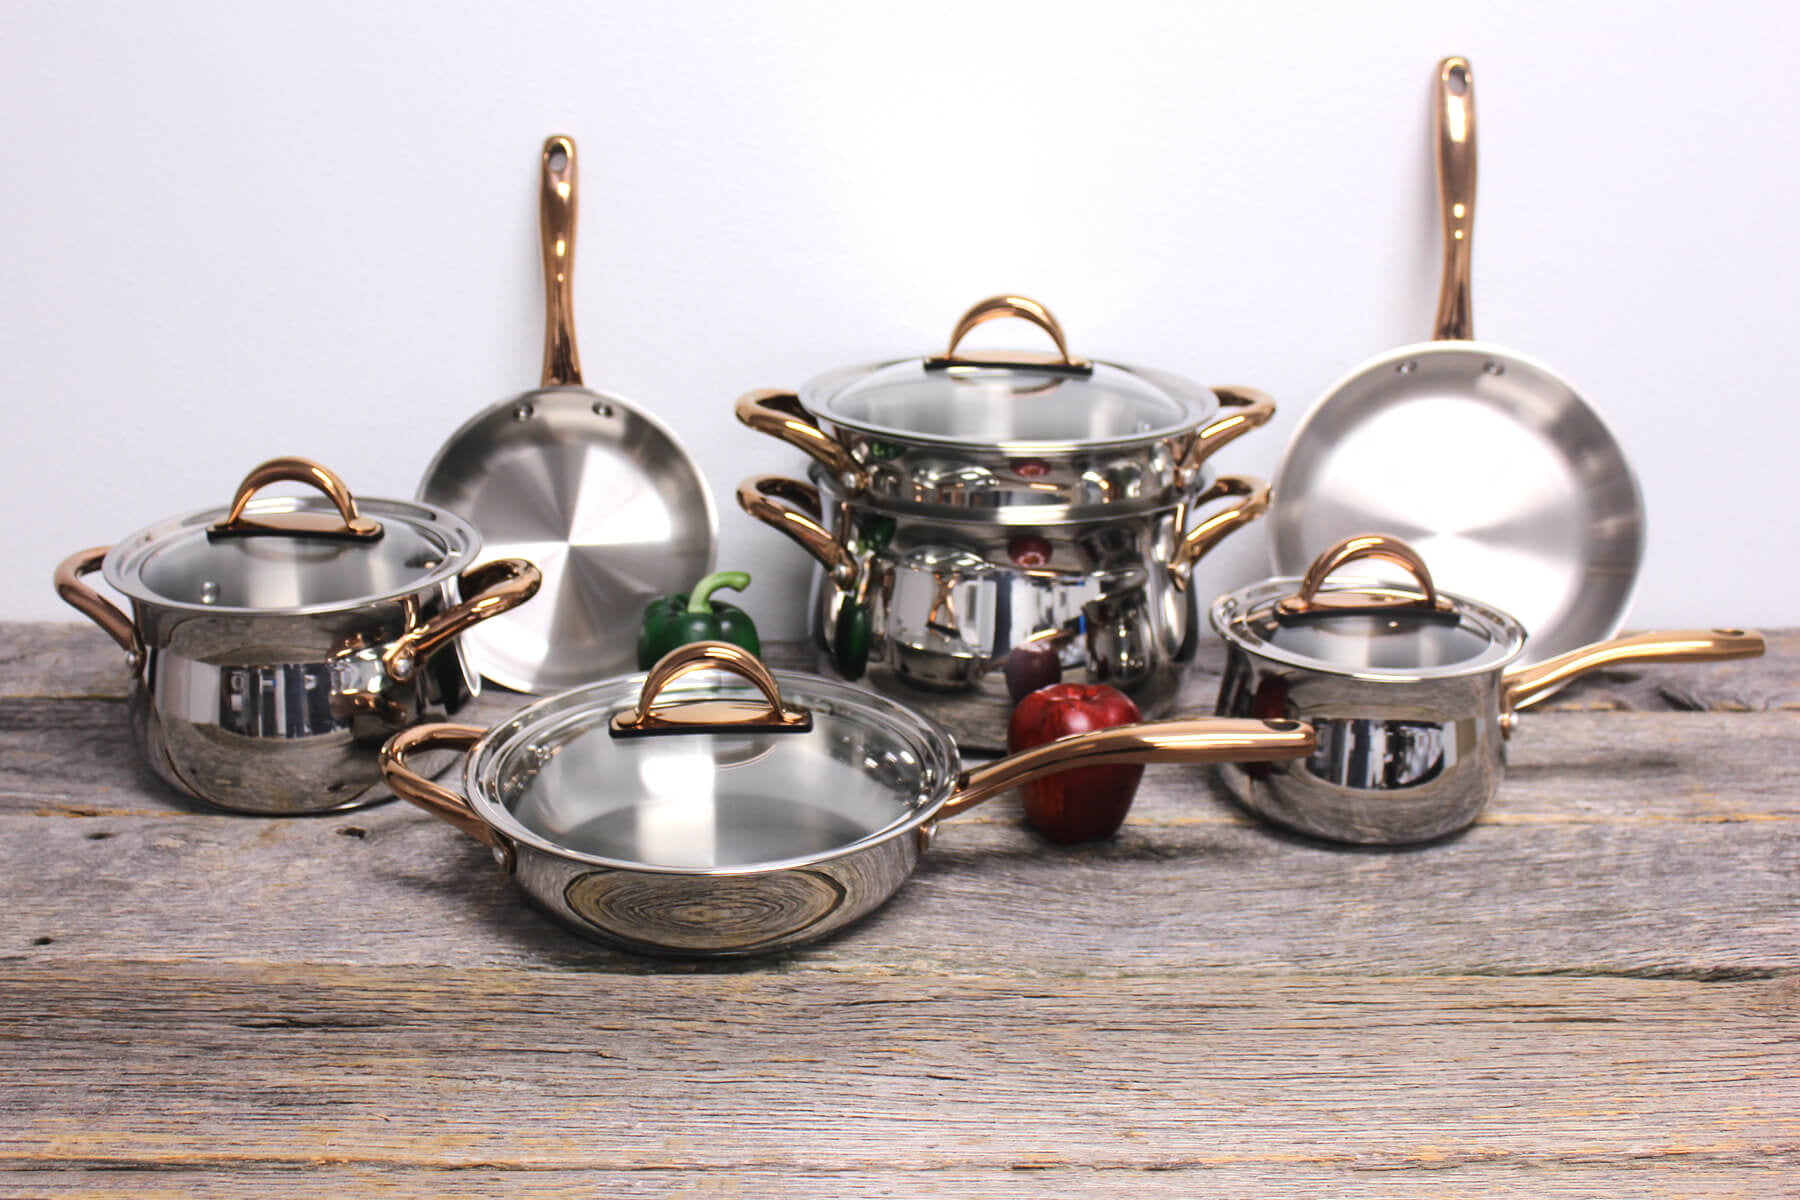 Ouro Gold 11Pc 18/10 SS Cookware Set, Metal Lids - Bed Bath & Beyond -  30502612